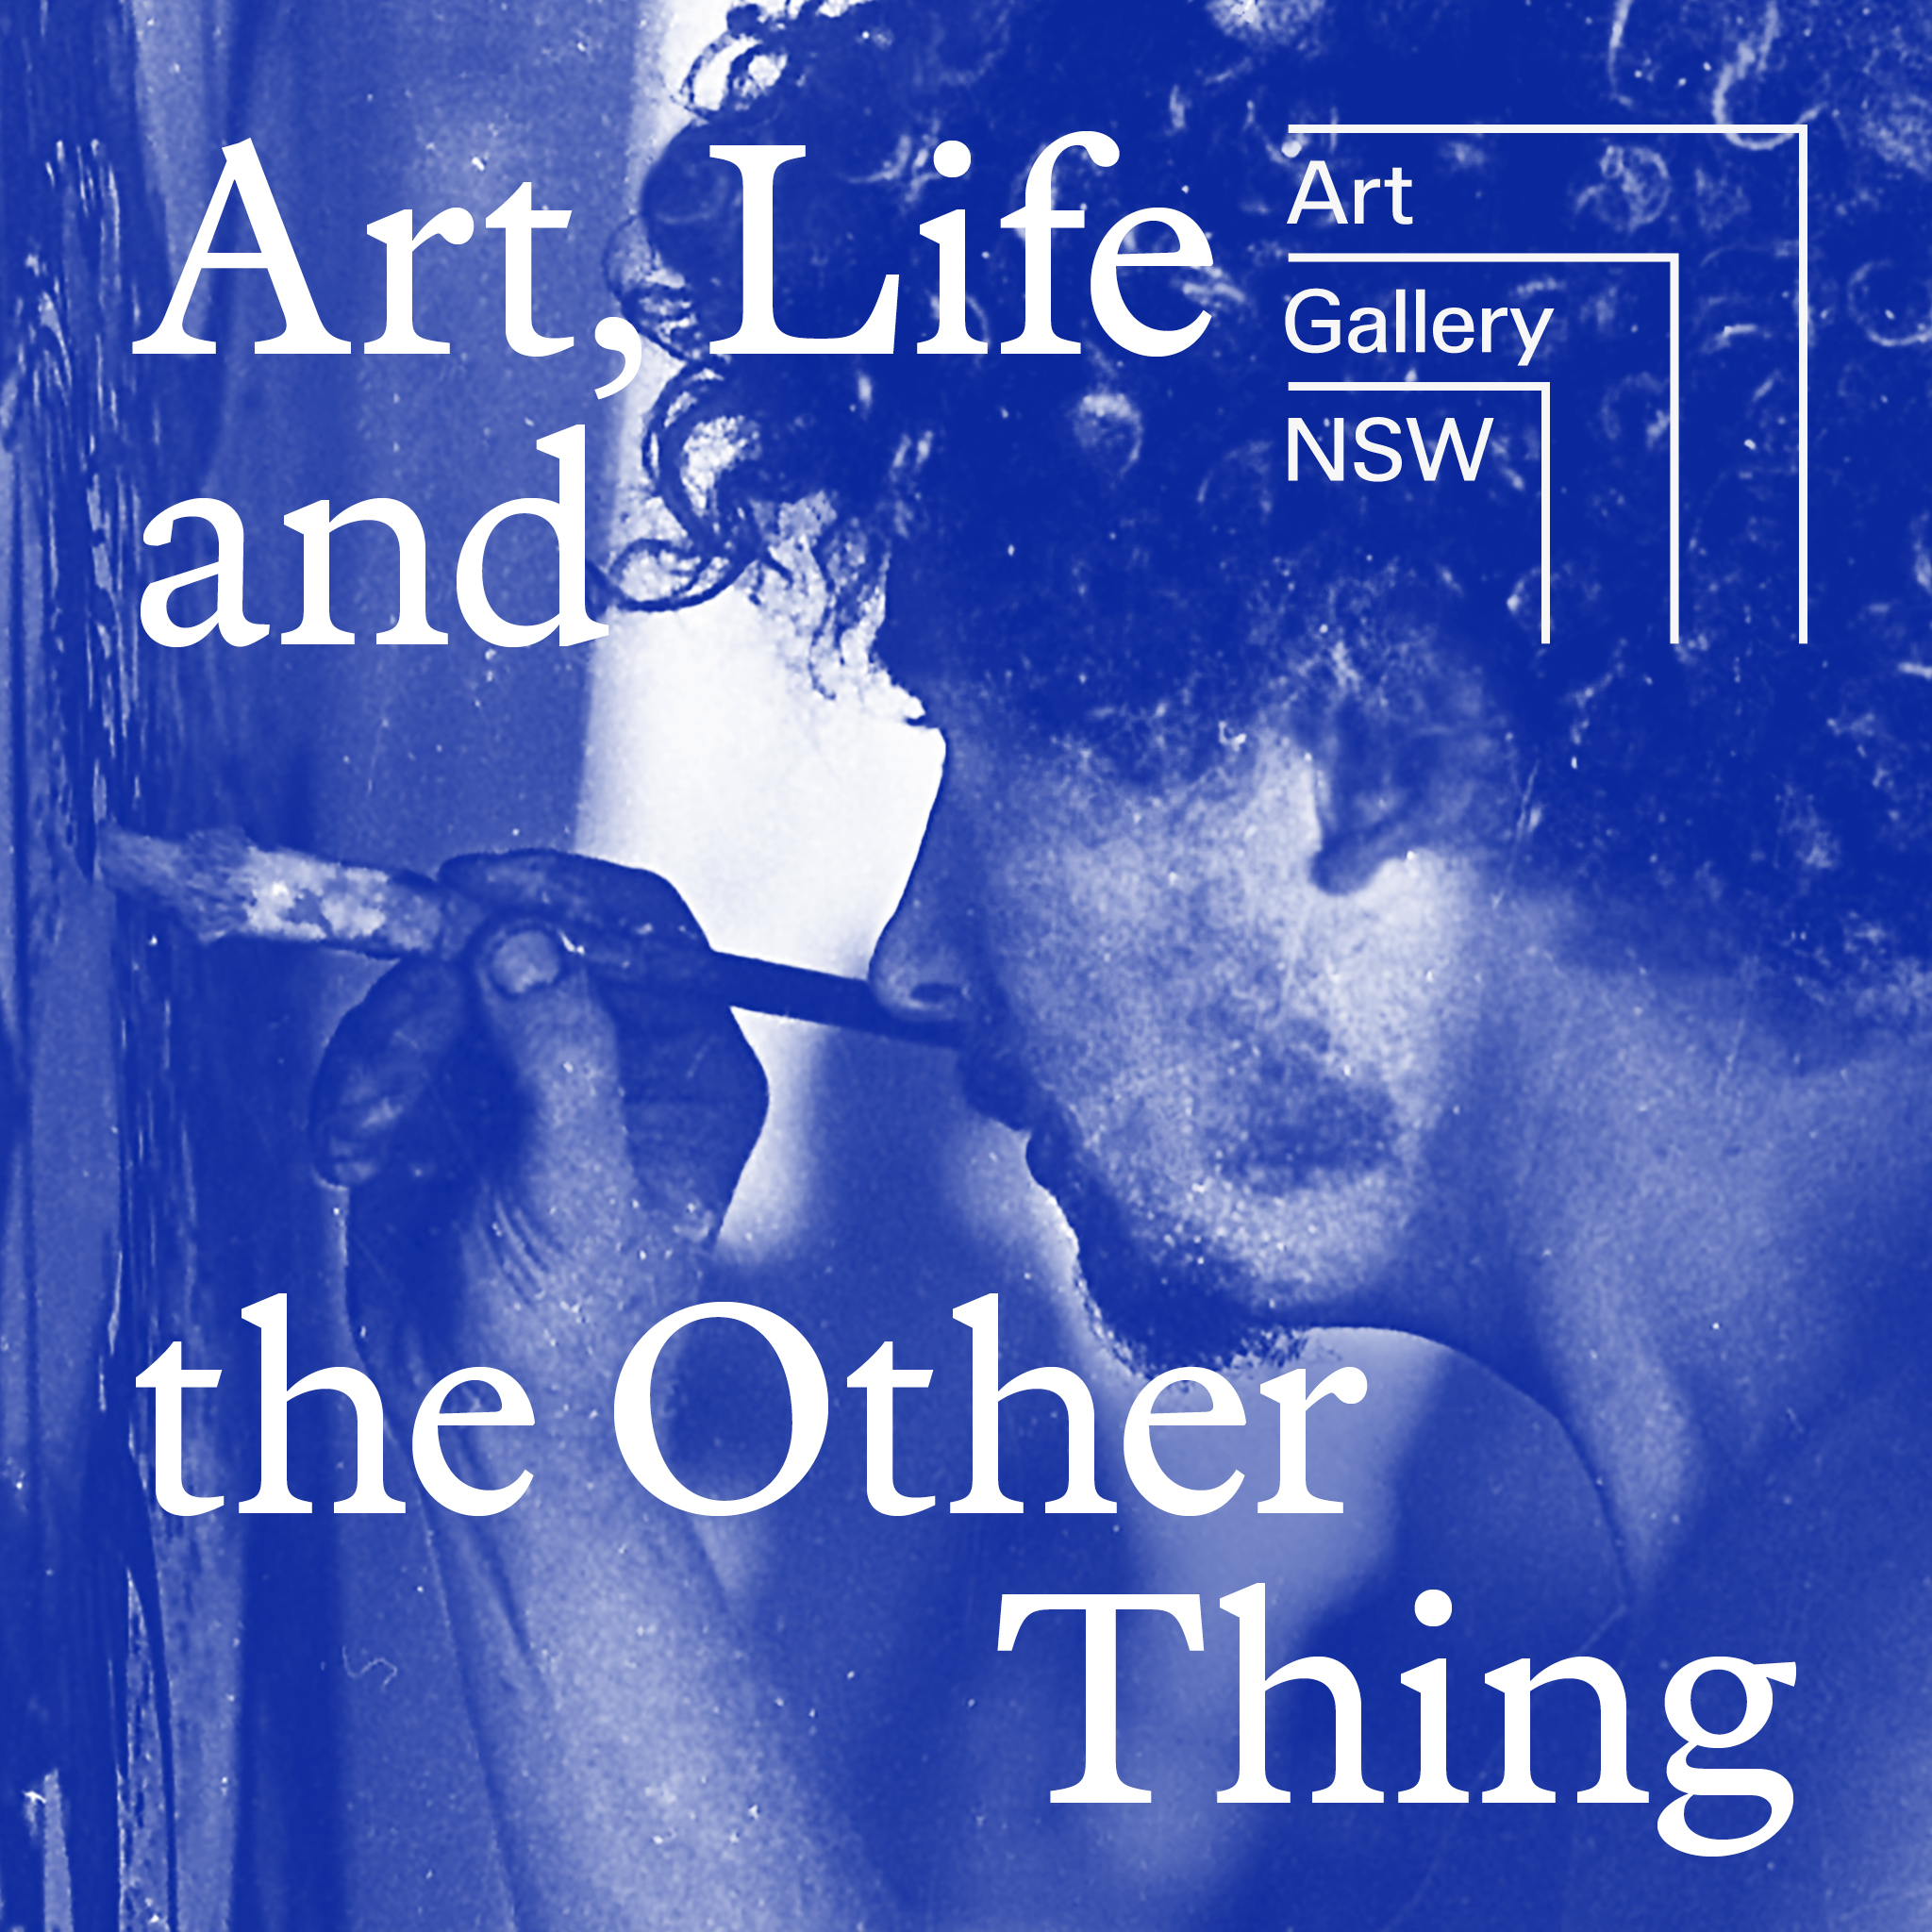 Introducing 'Art, life and the other thing'